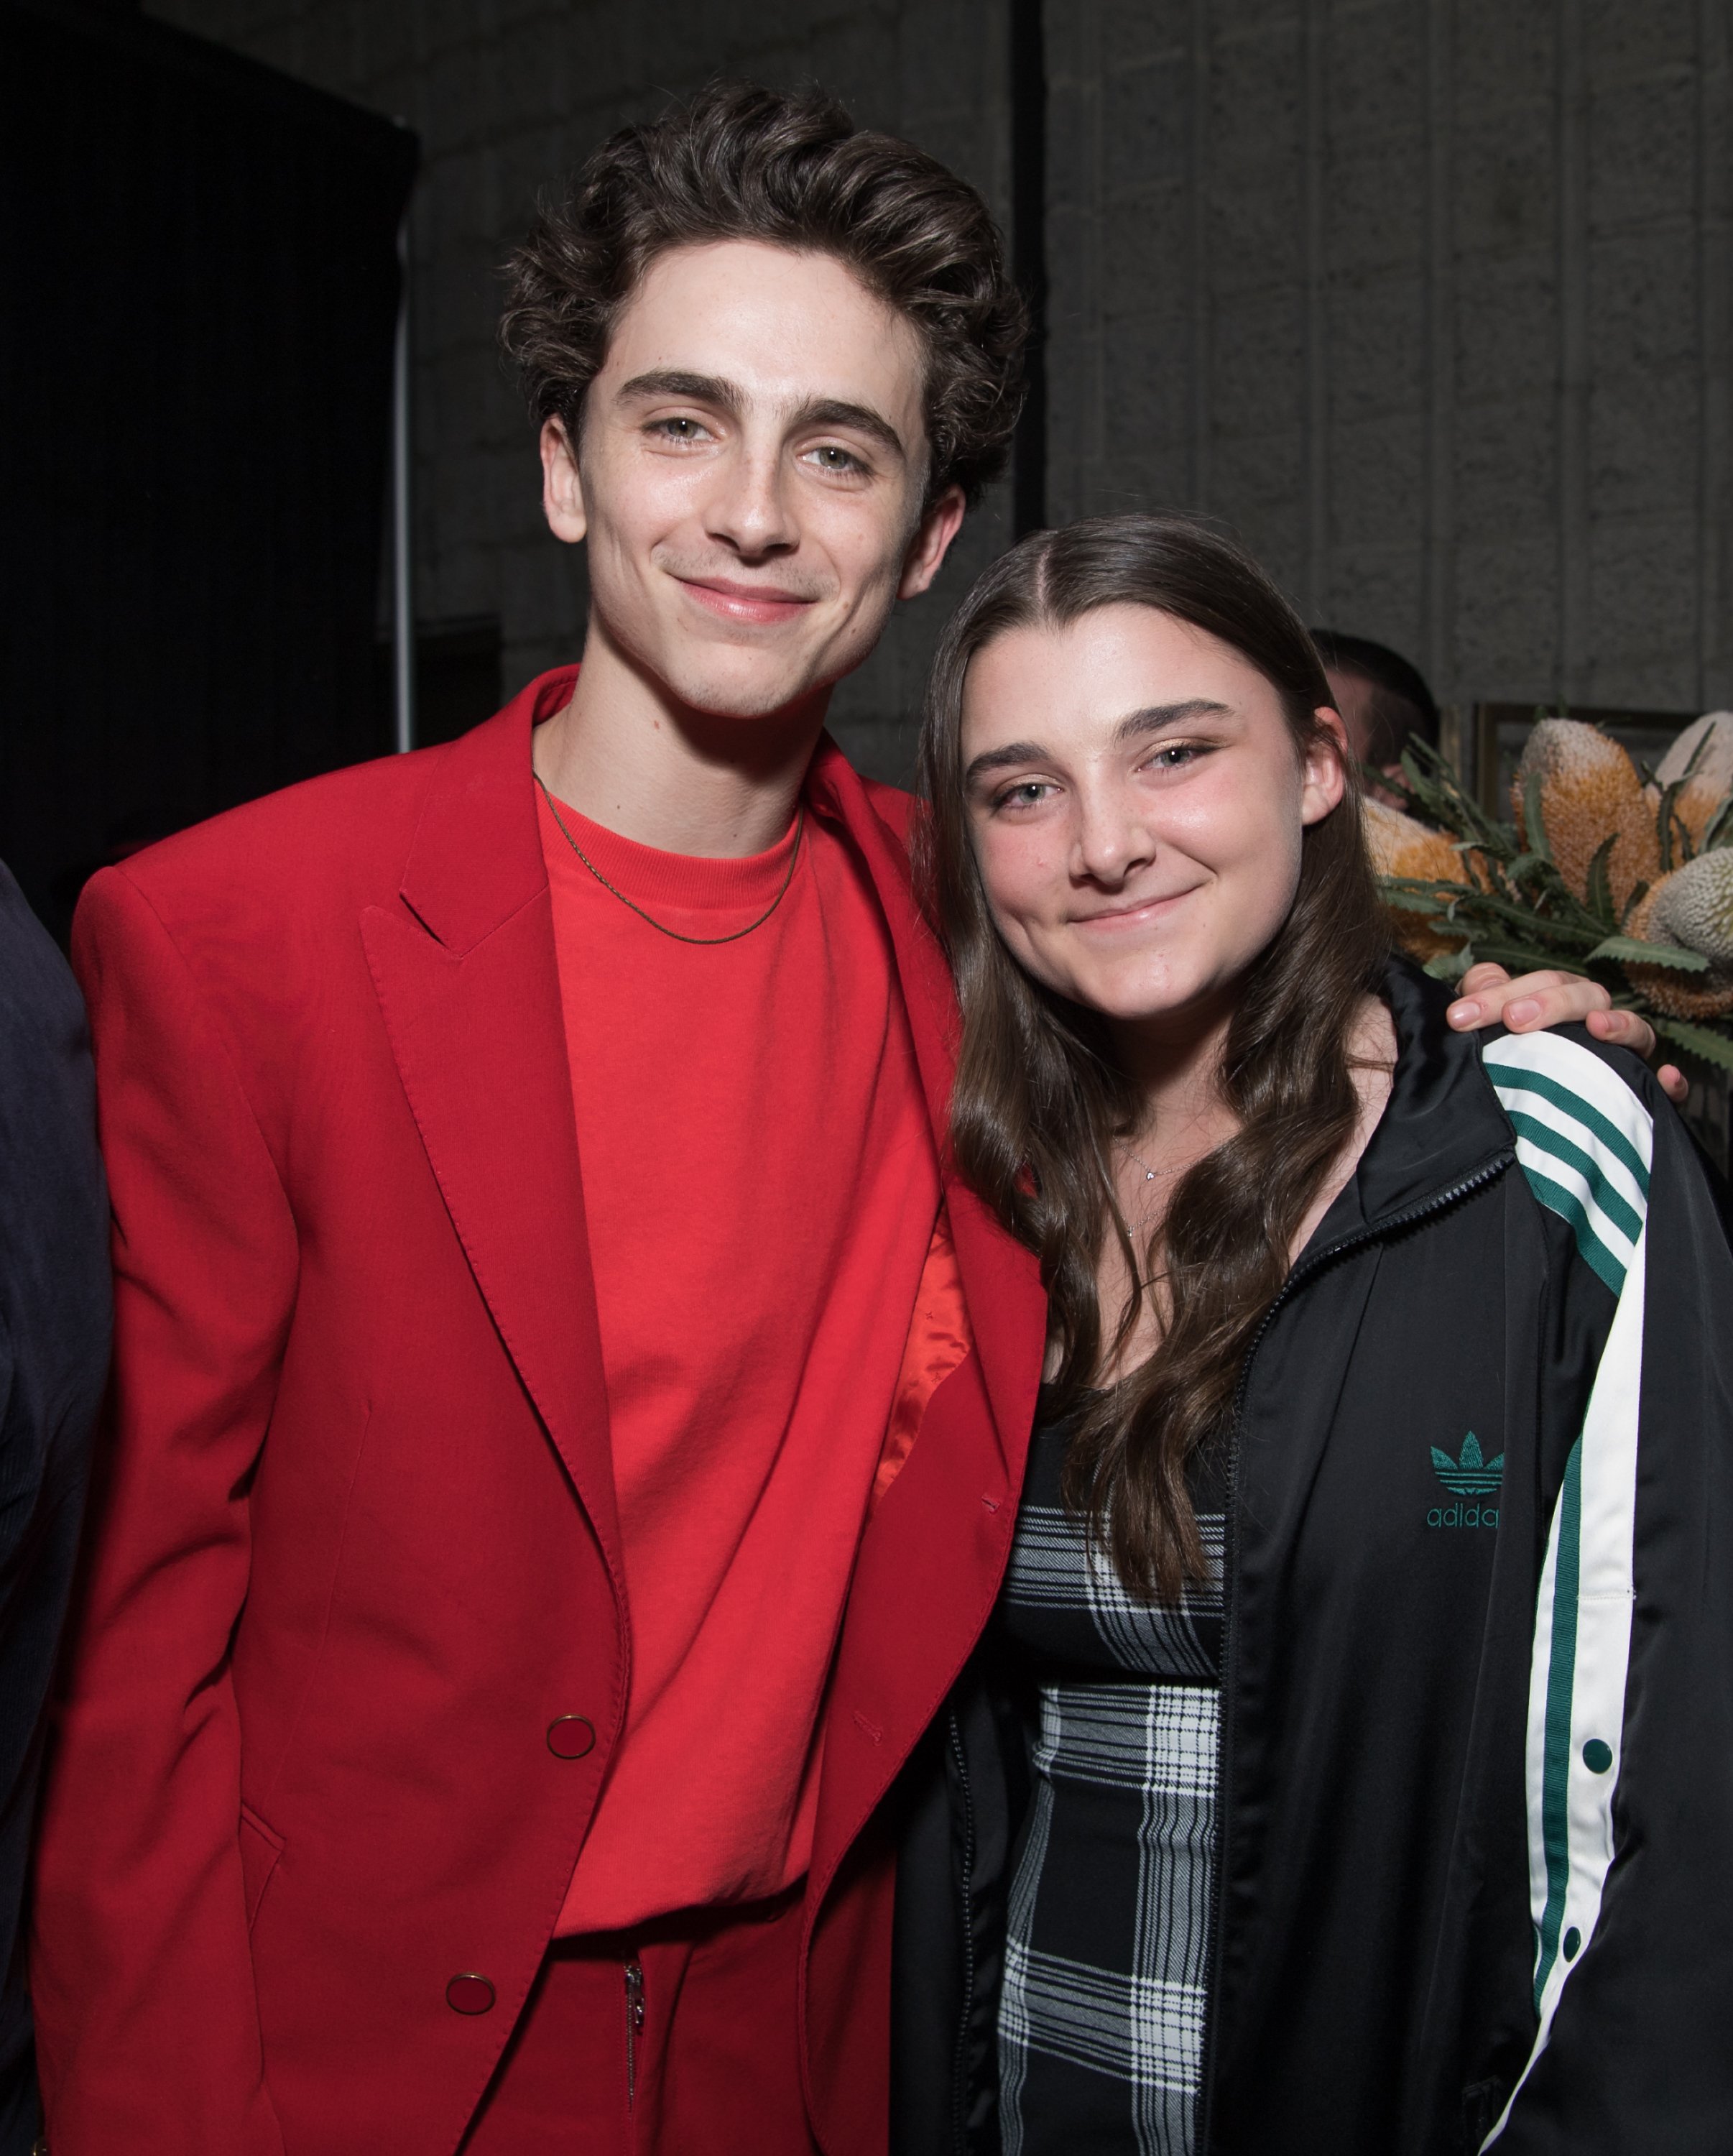 Timothee Chalamet (L) and Elisabeth Anne Carell attend the Amazon Studios Los Angeles premiere of "Beautiful Boy" at Samuel Goldwyn Theater on October 8, 2018 in Beverly Hills, California. | Source: Getty Images